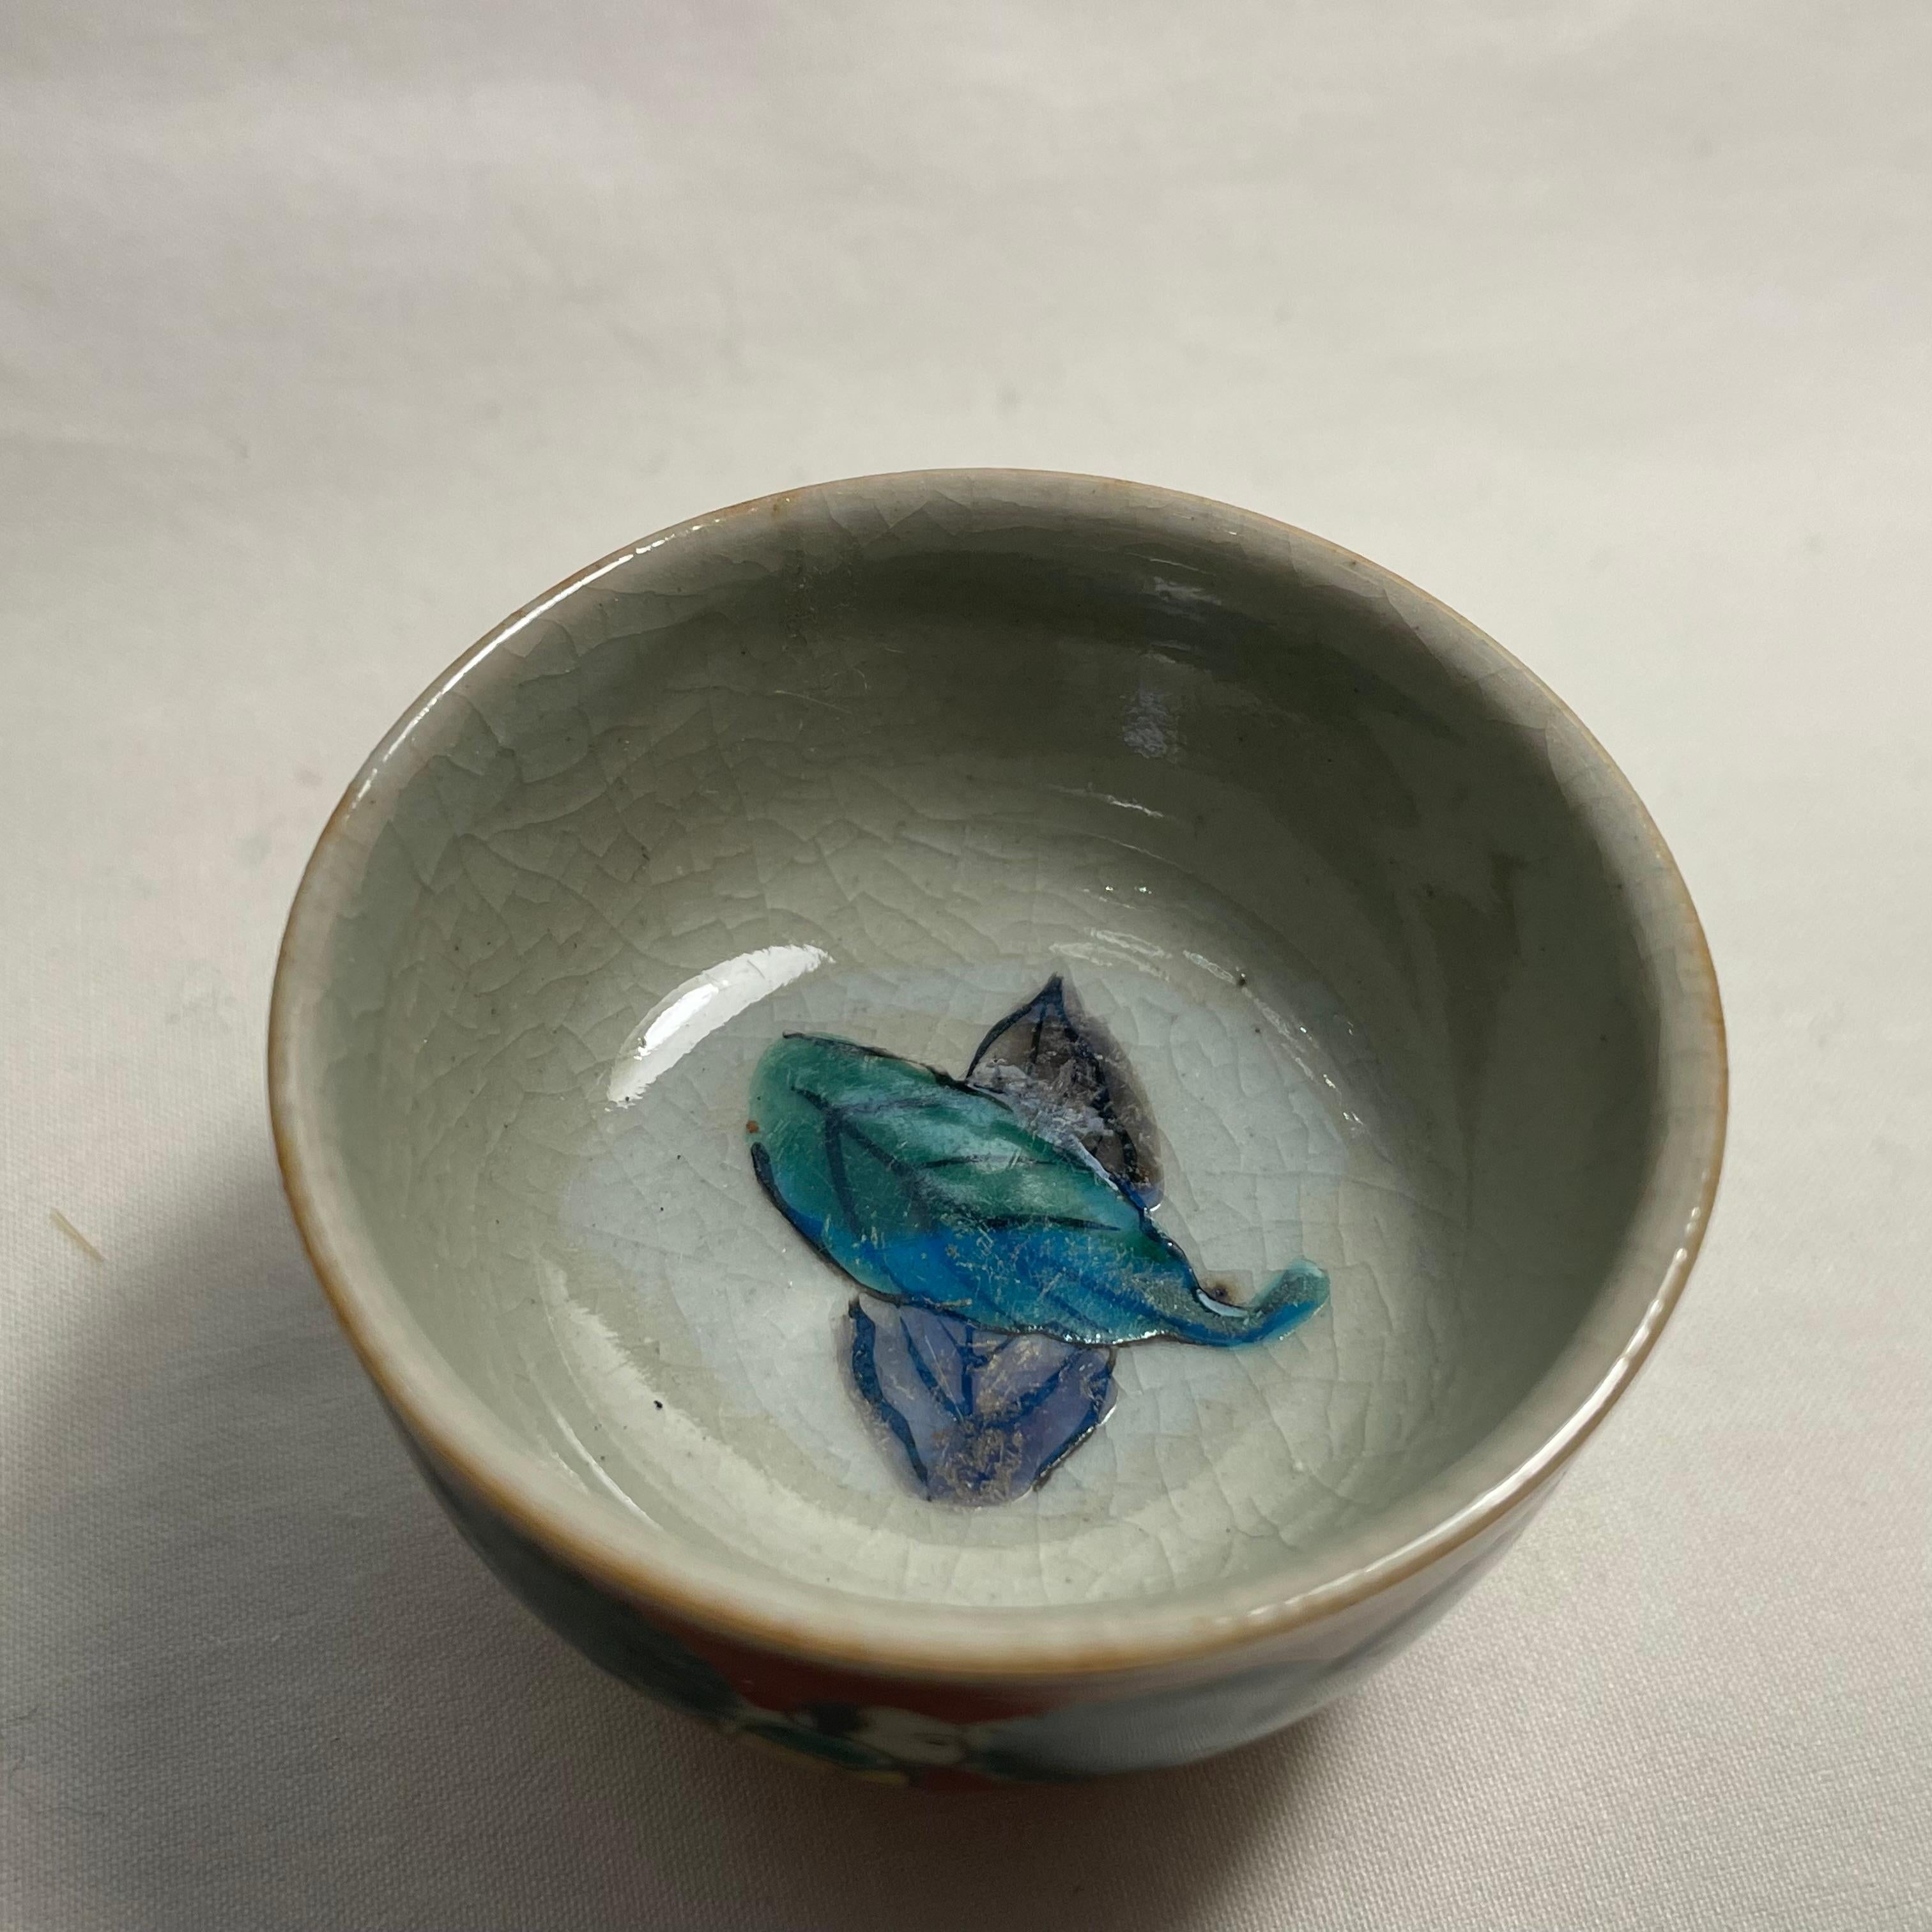 This is a small cup for drinking sake. It is called Ochoko in Japanese.
It was made in showa era around 1980s.  It is made with porcelain and all hand painted. 
This is Kutani ware. And it is they style called Mokubei AOKI.

Dimensions:
5.1 x 5.1 x